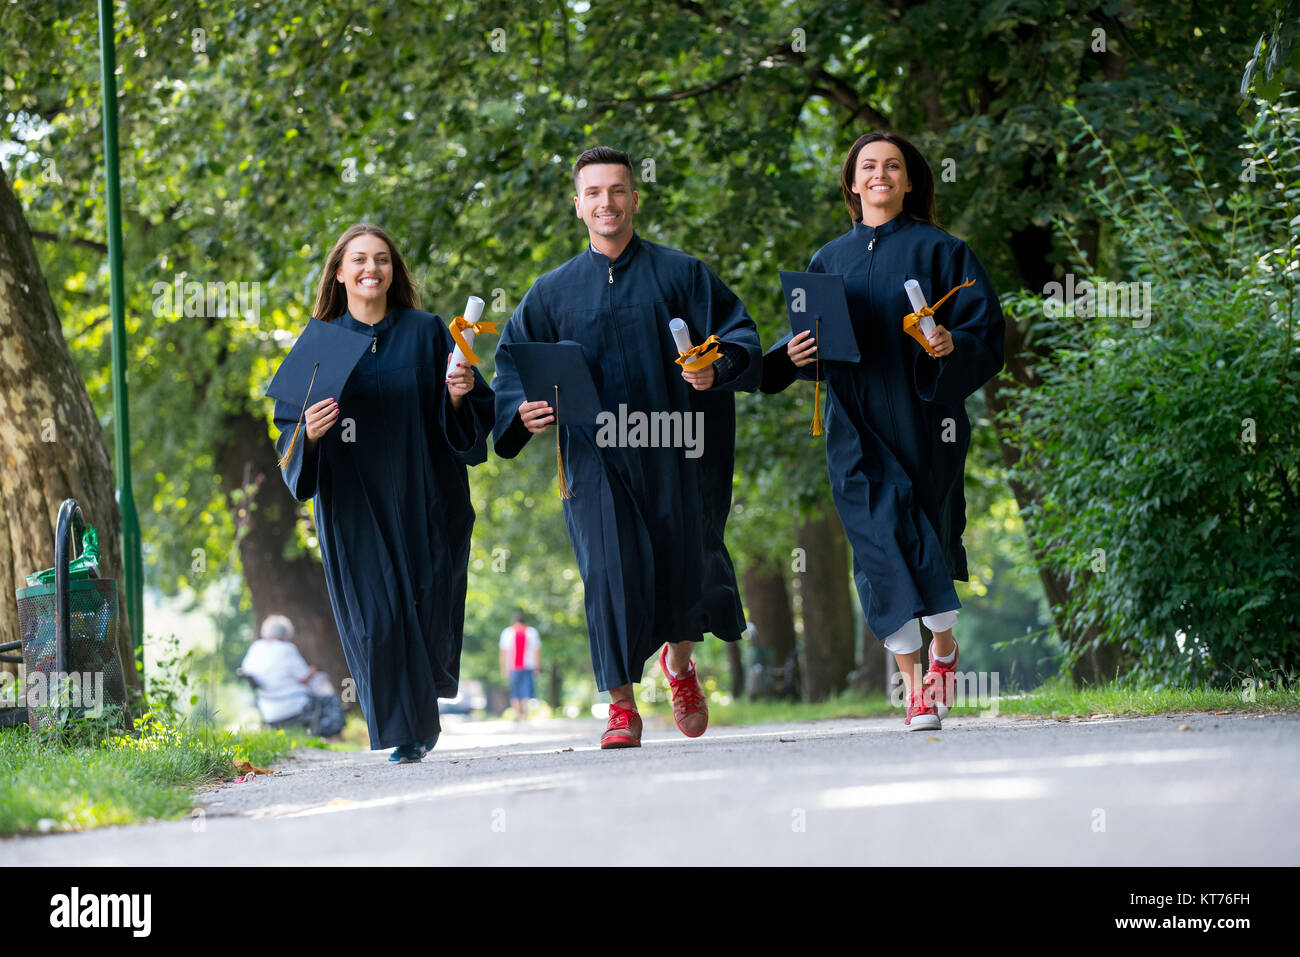 education, graduation, people concept - group of happy international students in mortar boards and bachelor gowns with diplomas Stock Photo